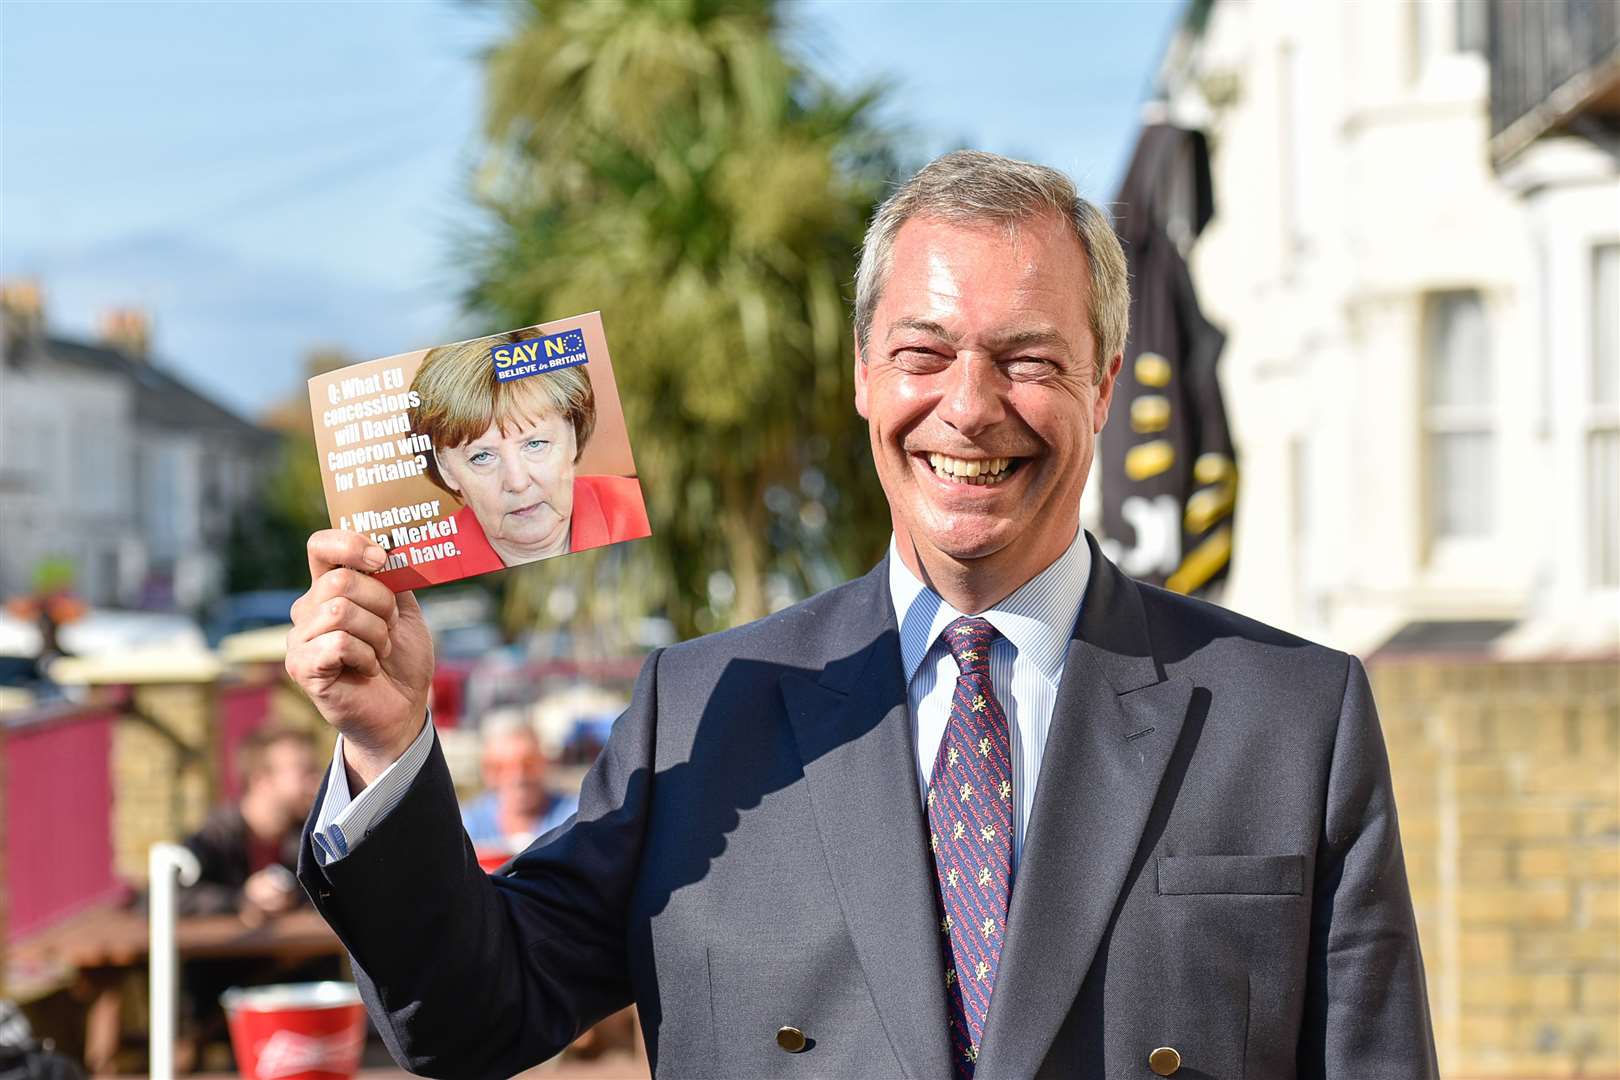 Mr Farage kicking off his Brexit campaign in Cliftonville in 2015. Picture: Alan Langley